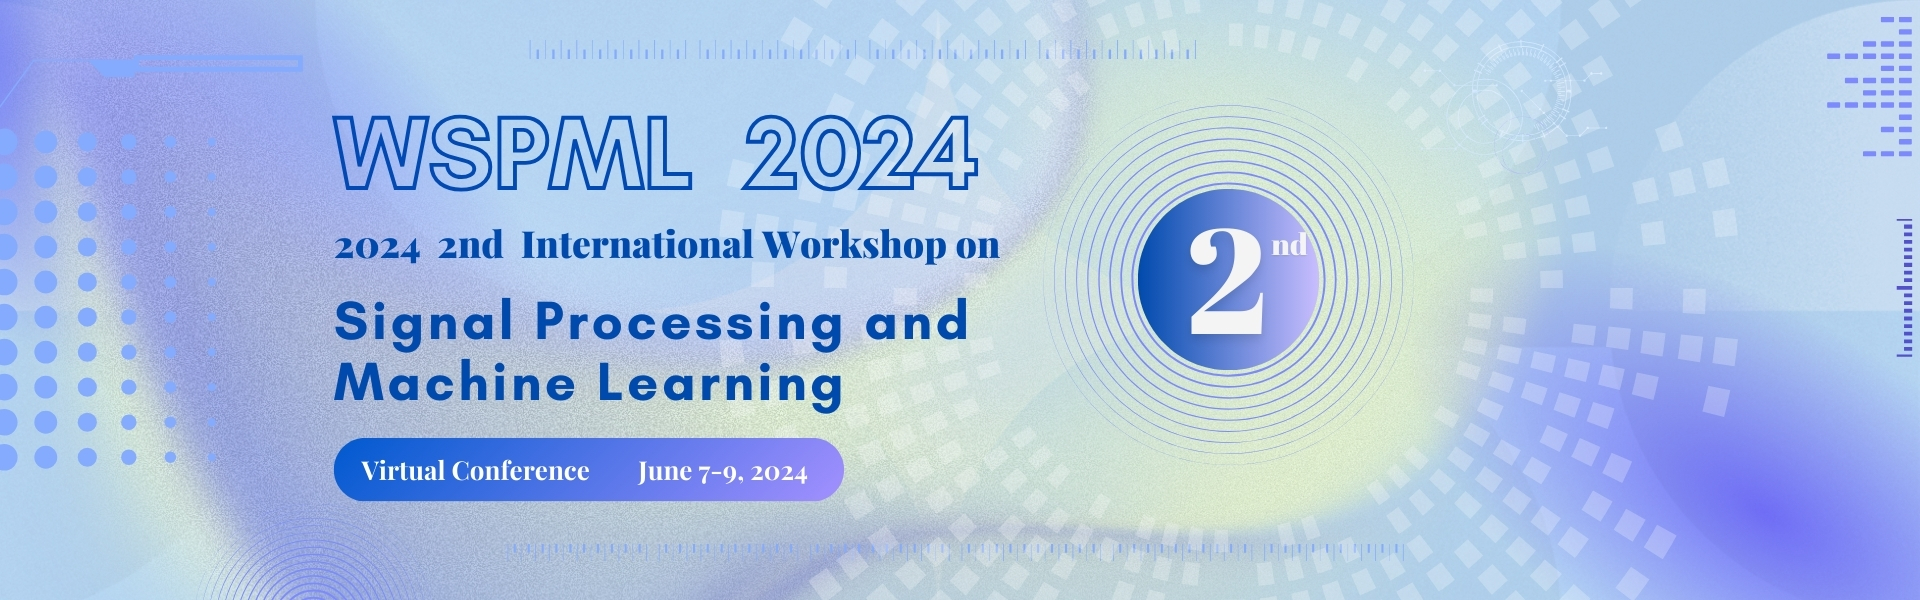 2024 2nd International Workshop on Signal Processing and Machine Learning (WSPML 2024)